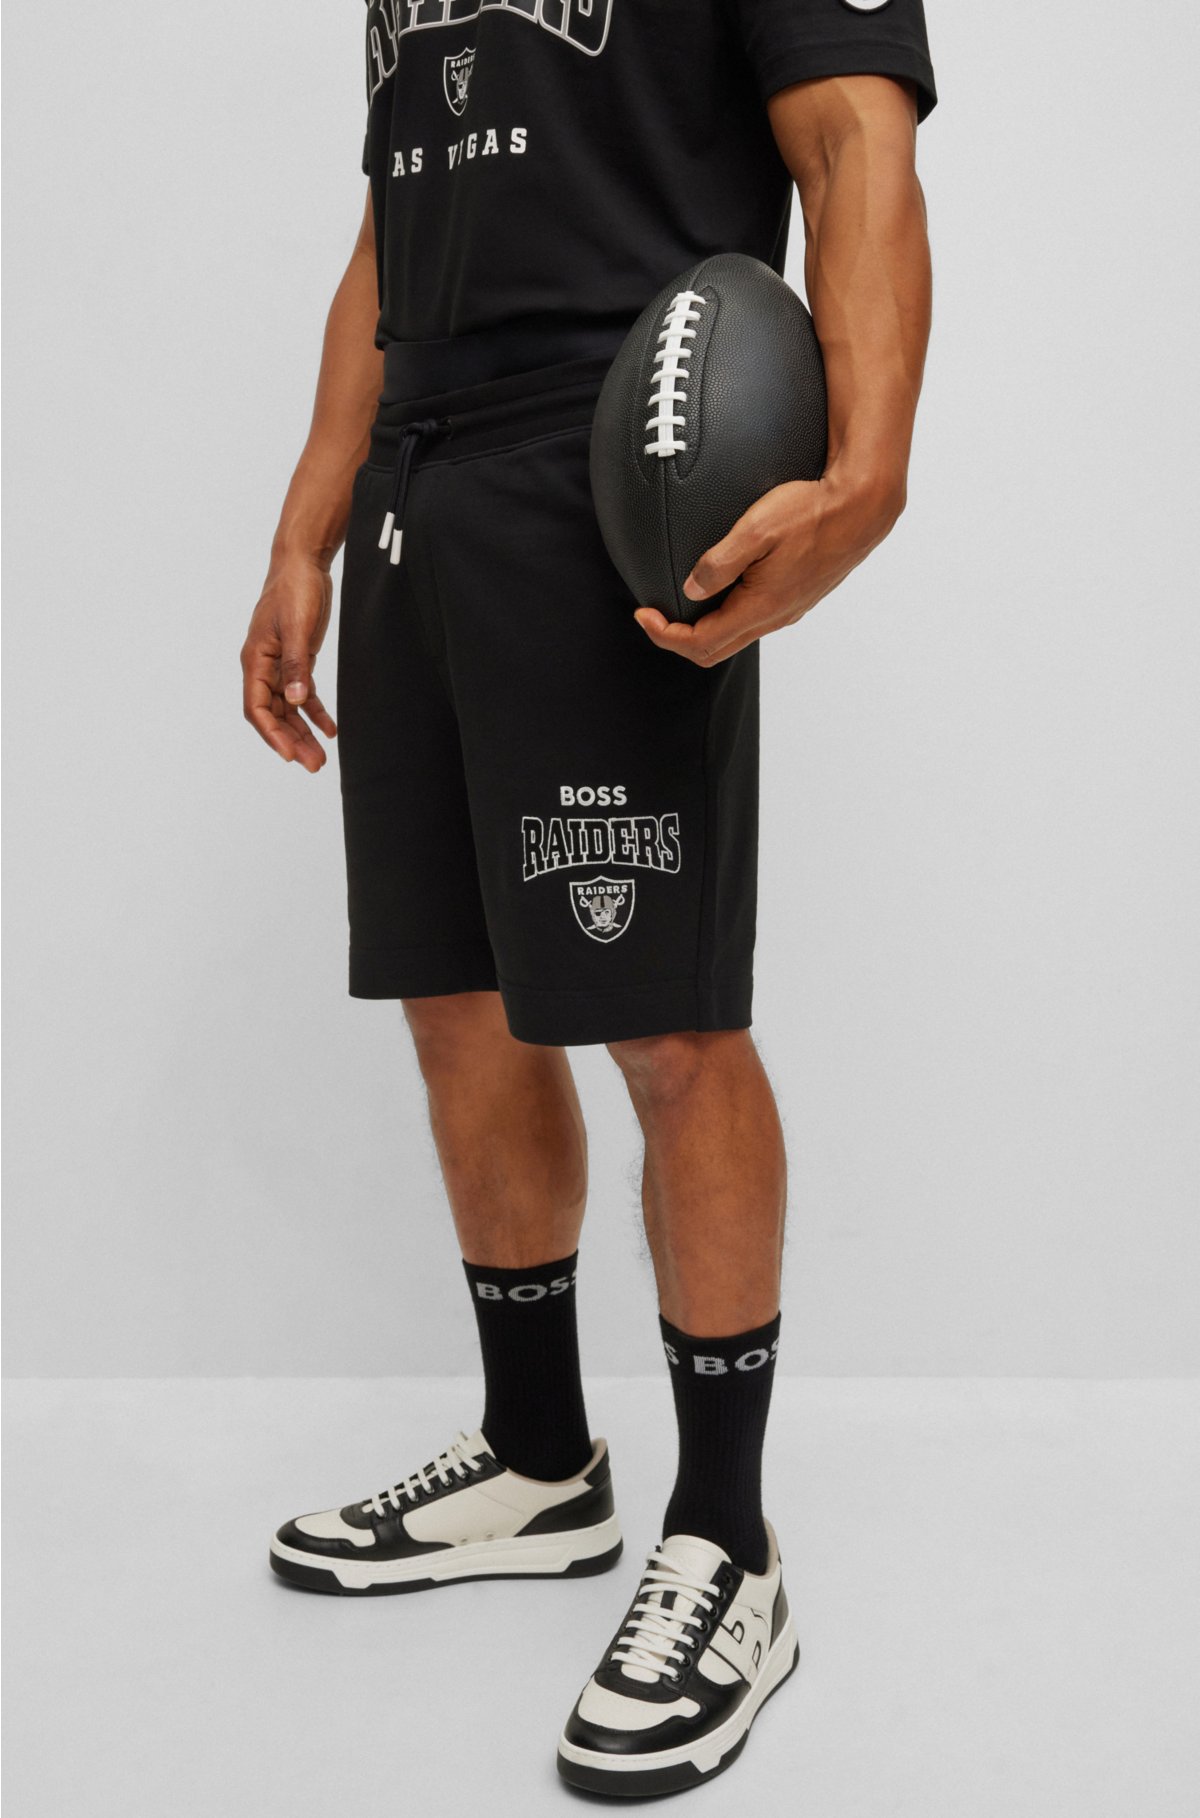 BOSS x NFL cotton-terry shorts with collaborative branding, Raiders